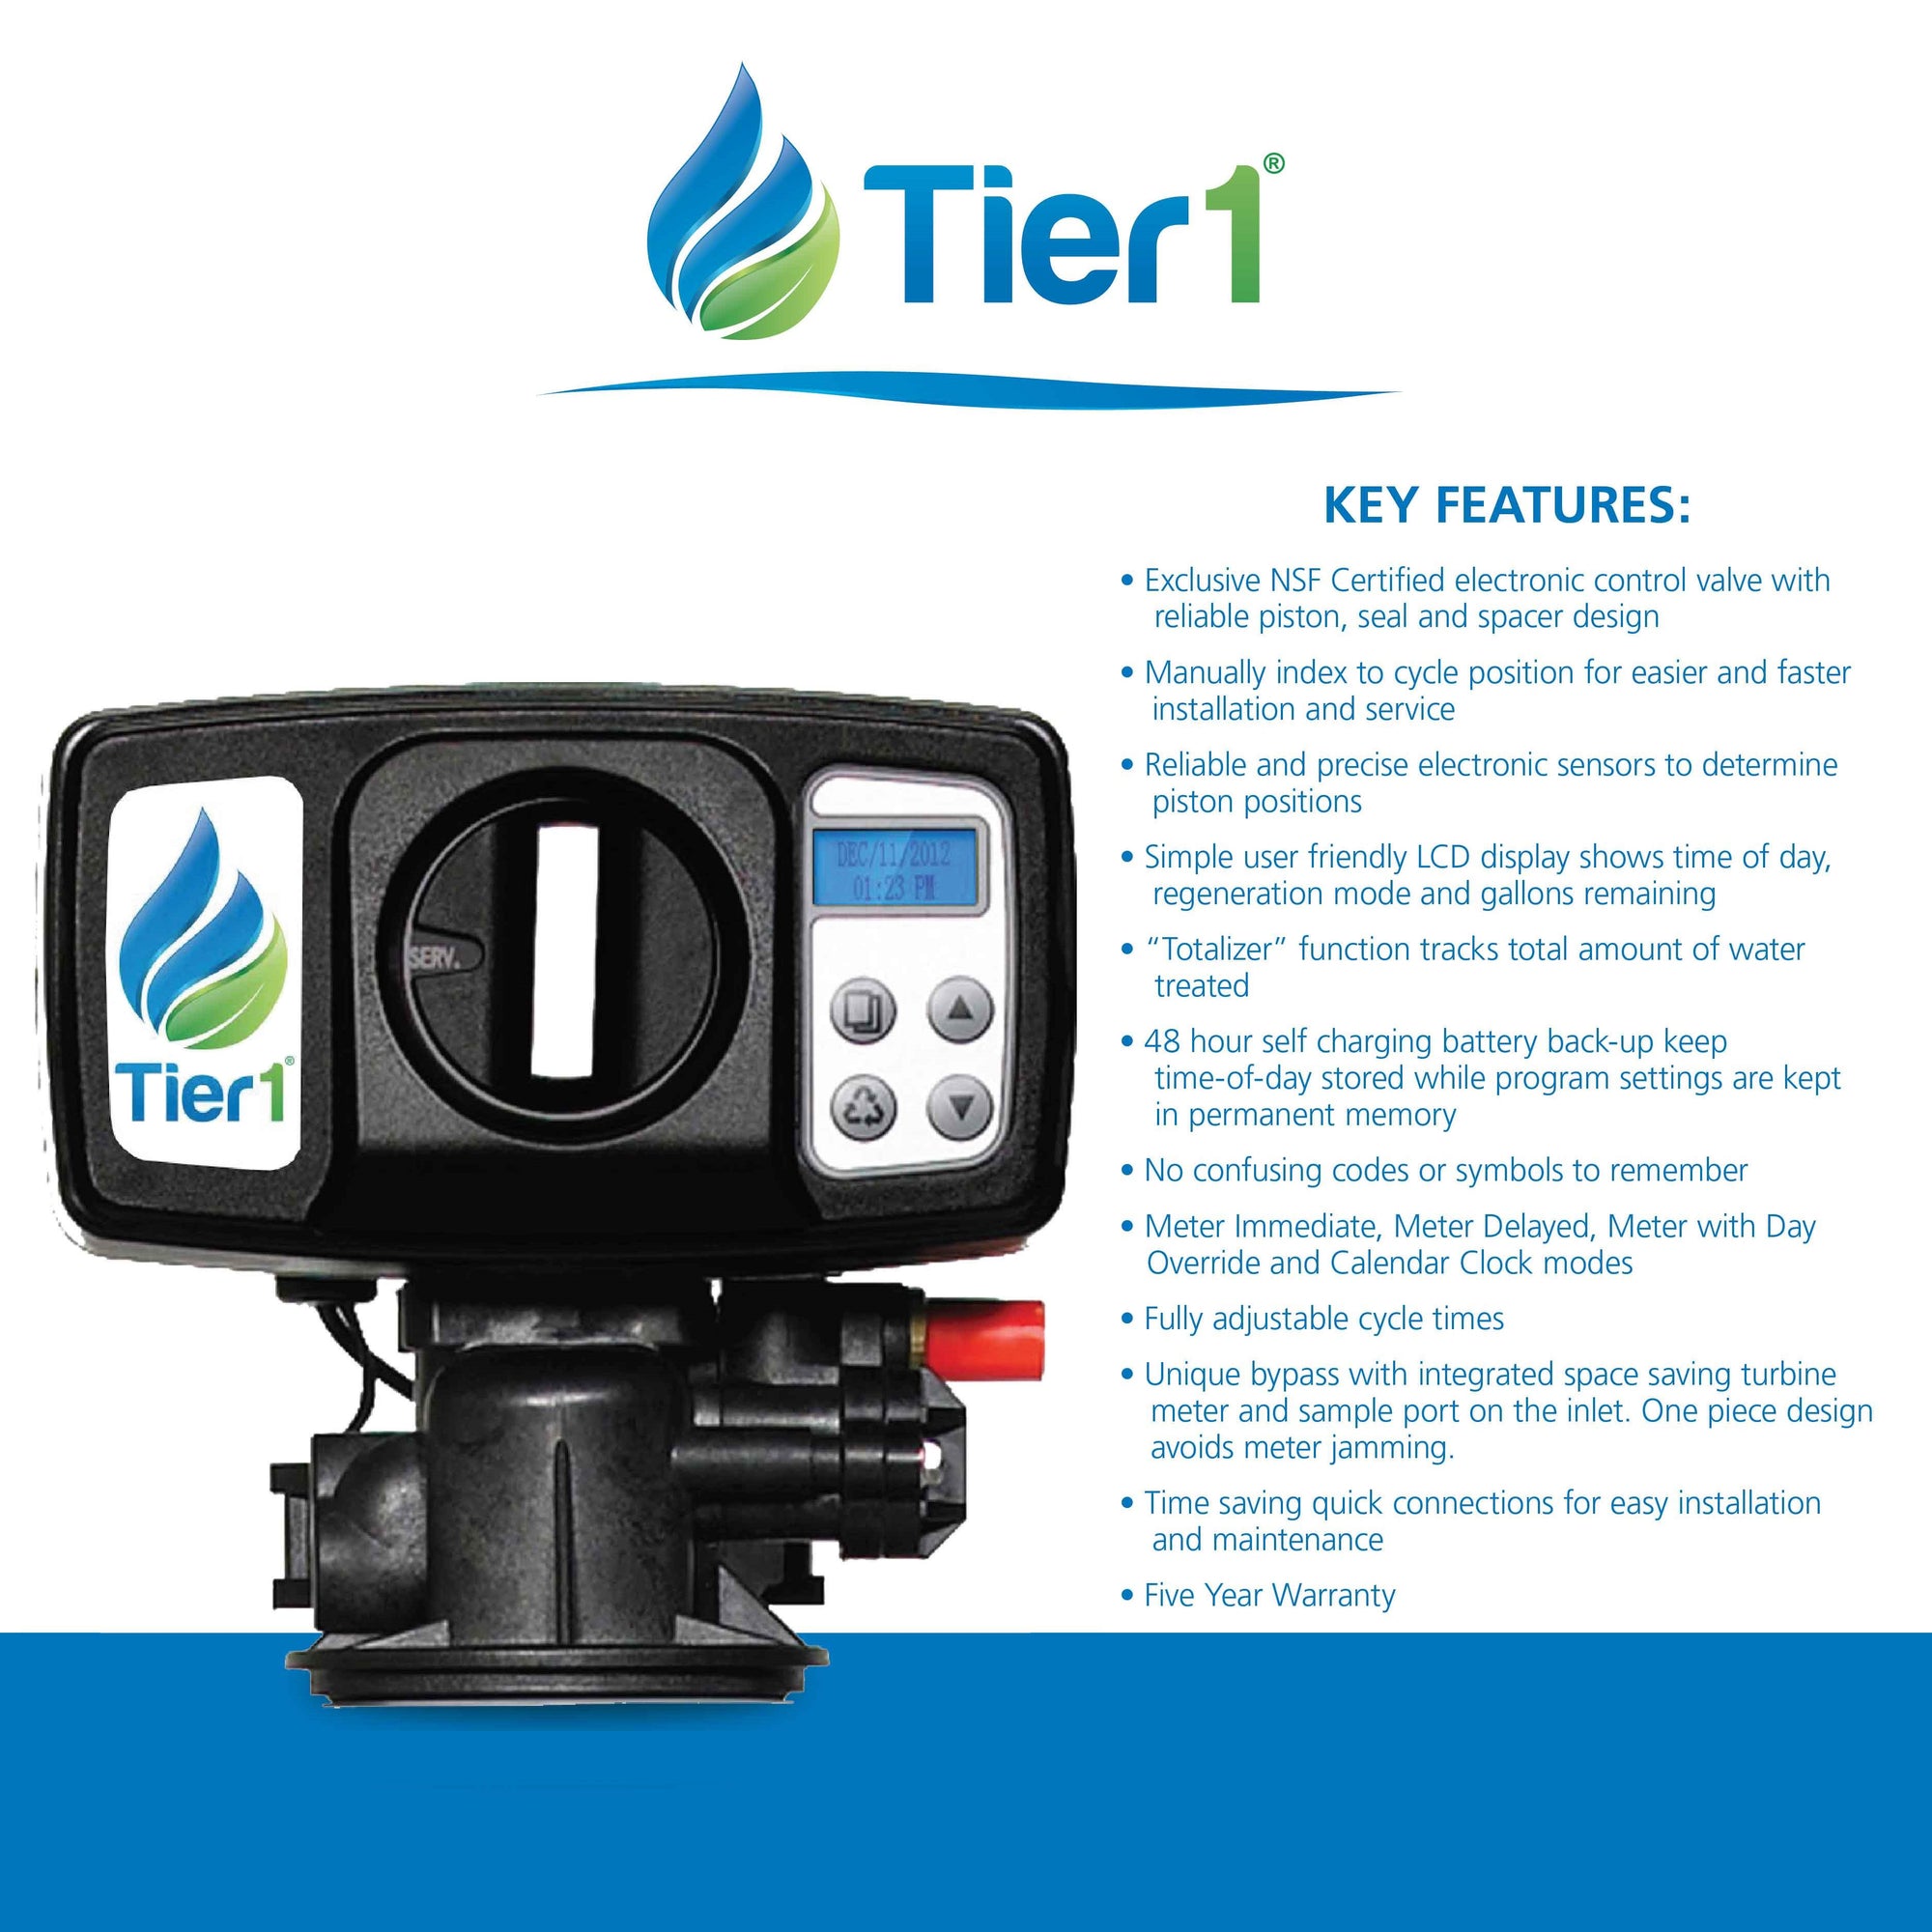 Precision Certified Series Tier1 Whole House Water Neutralizing System for 4 - 6 Bathrooms